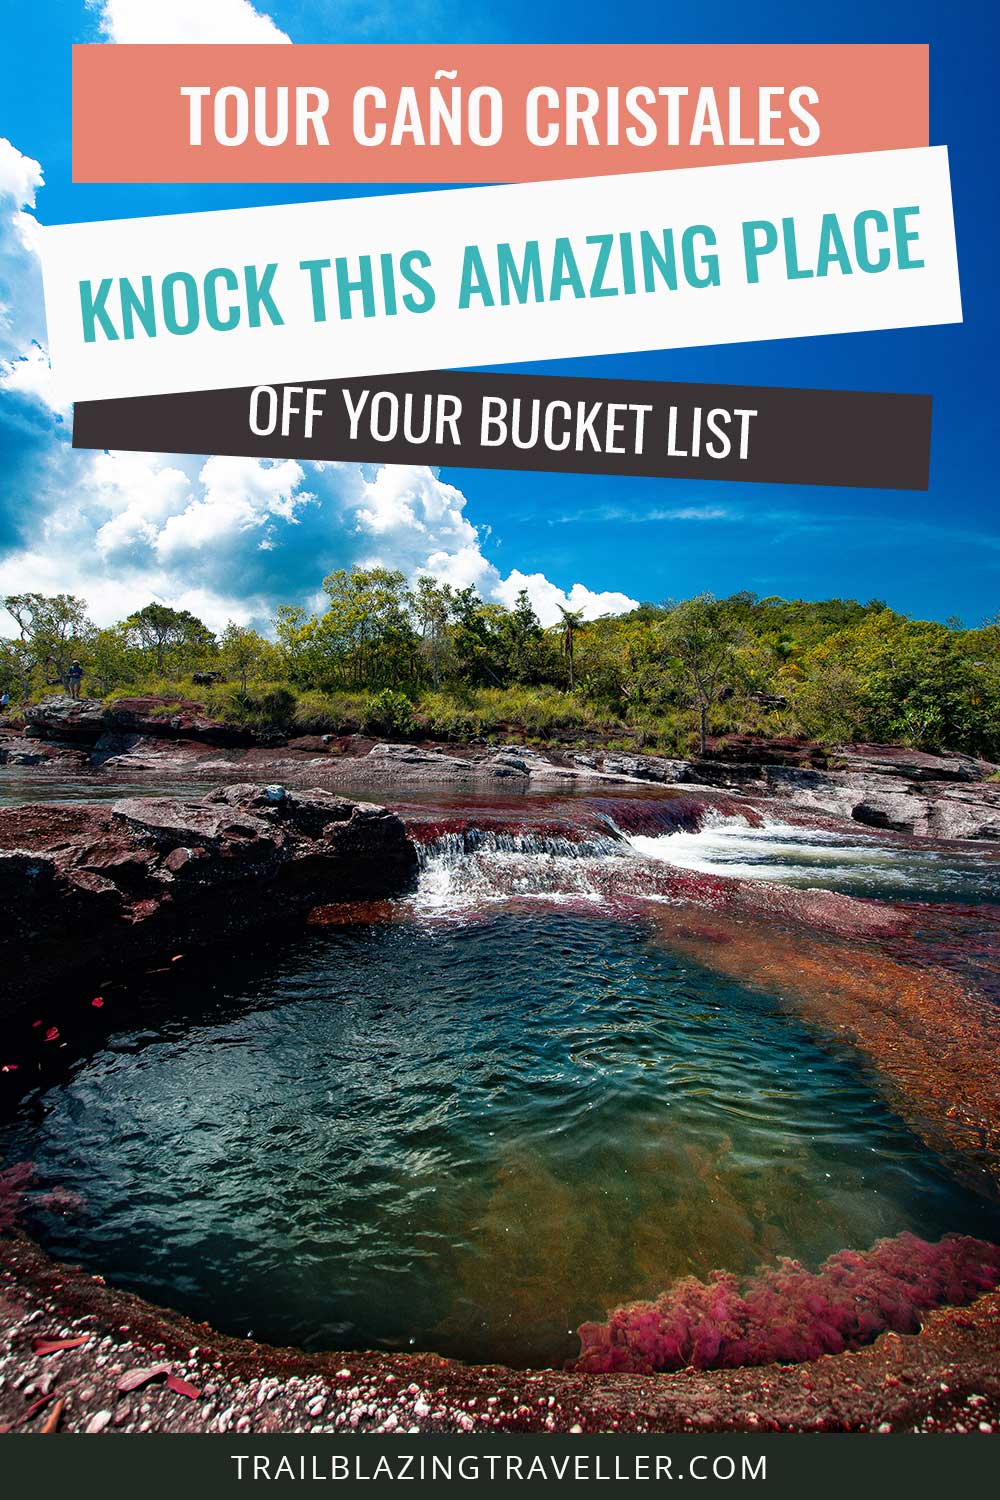 Tour Caño Cristales – Knock This Amazing Place Off Your Bucket List